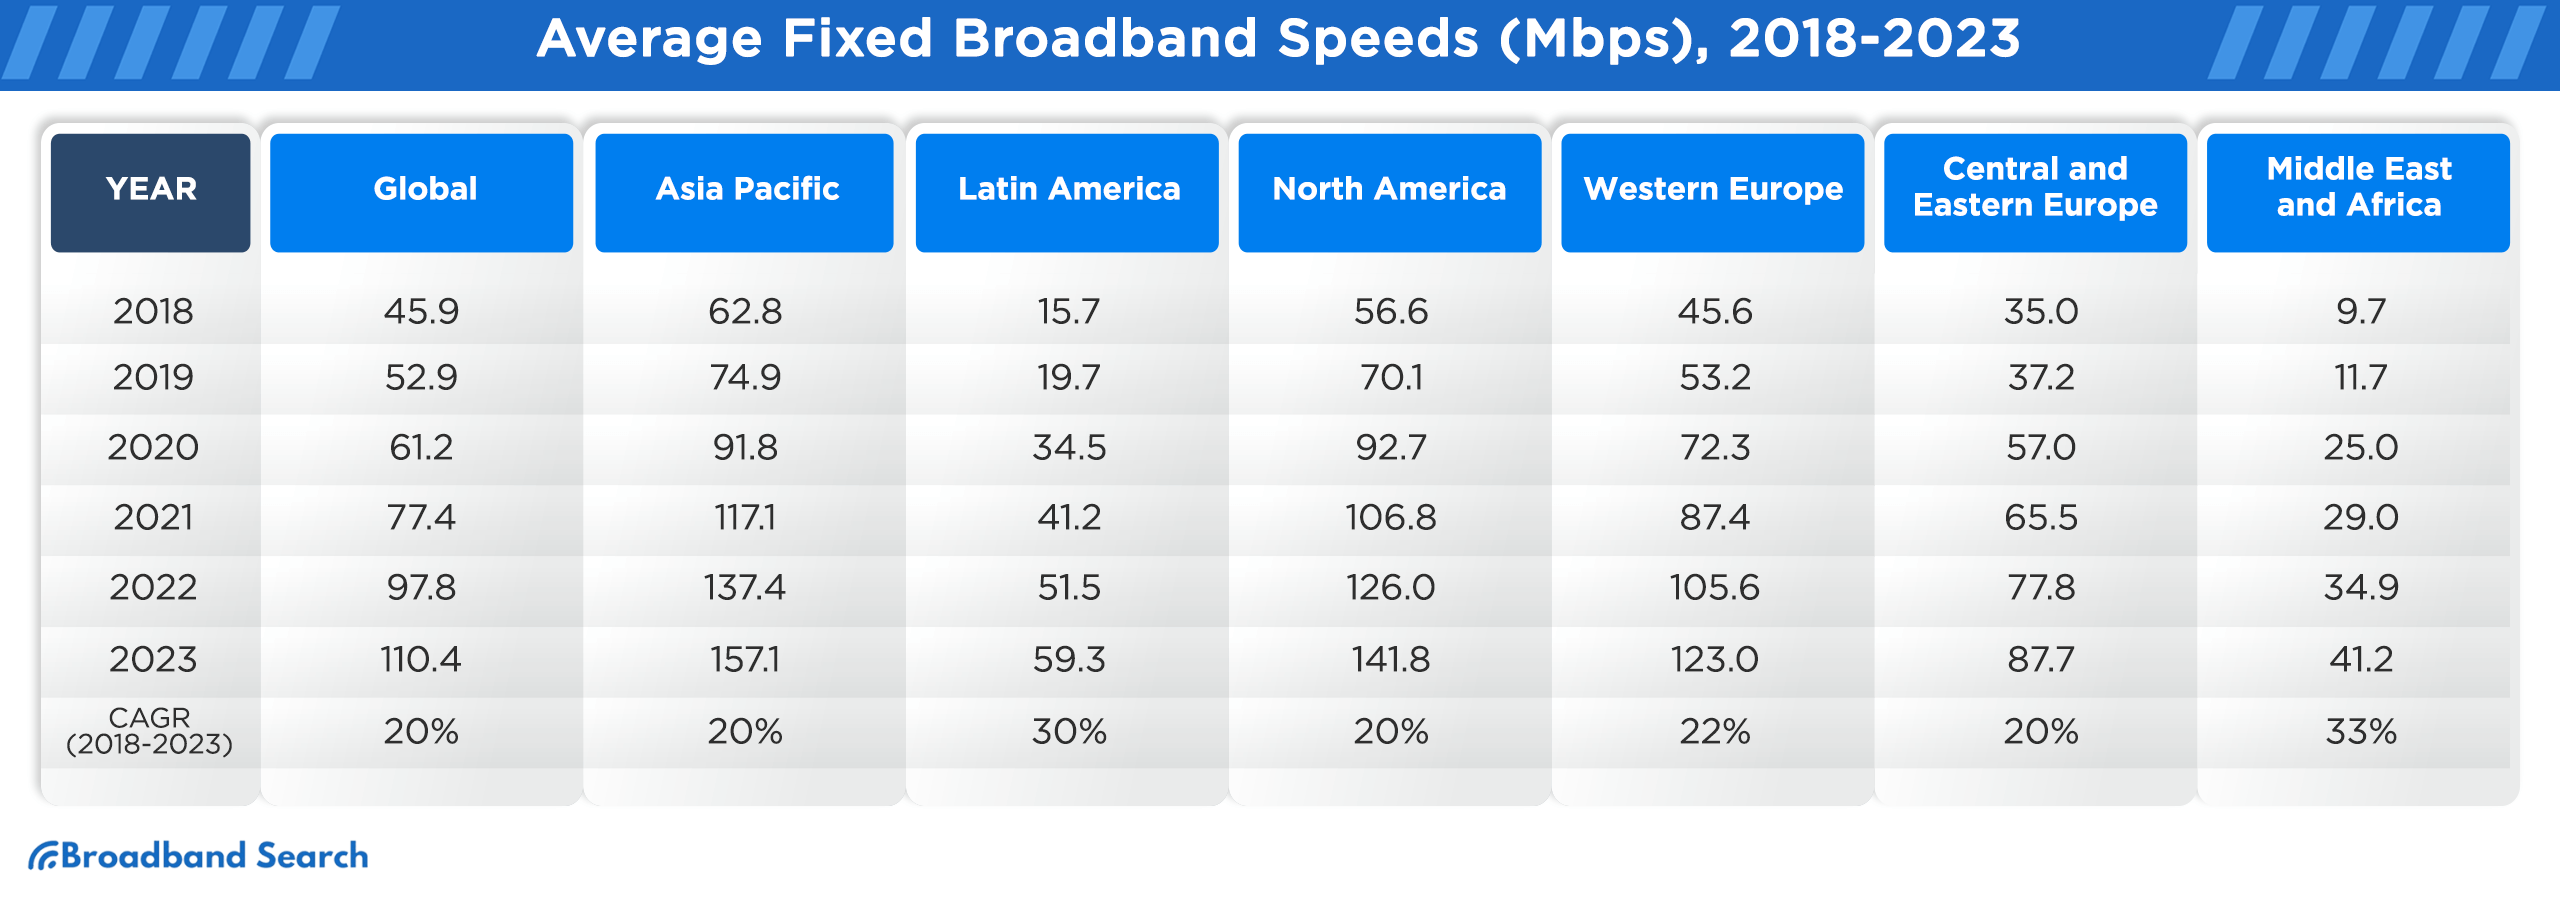 Average Fixed Broadband Speeds (Mbps), from 2018 to 2023